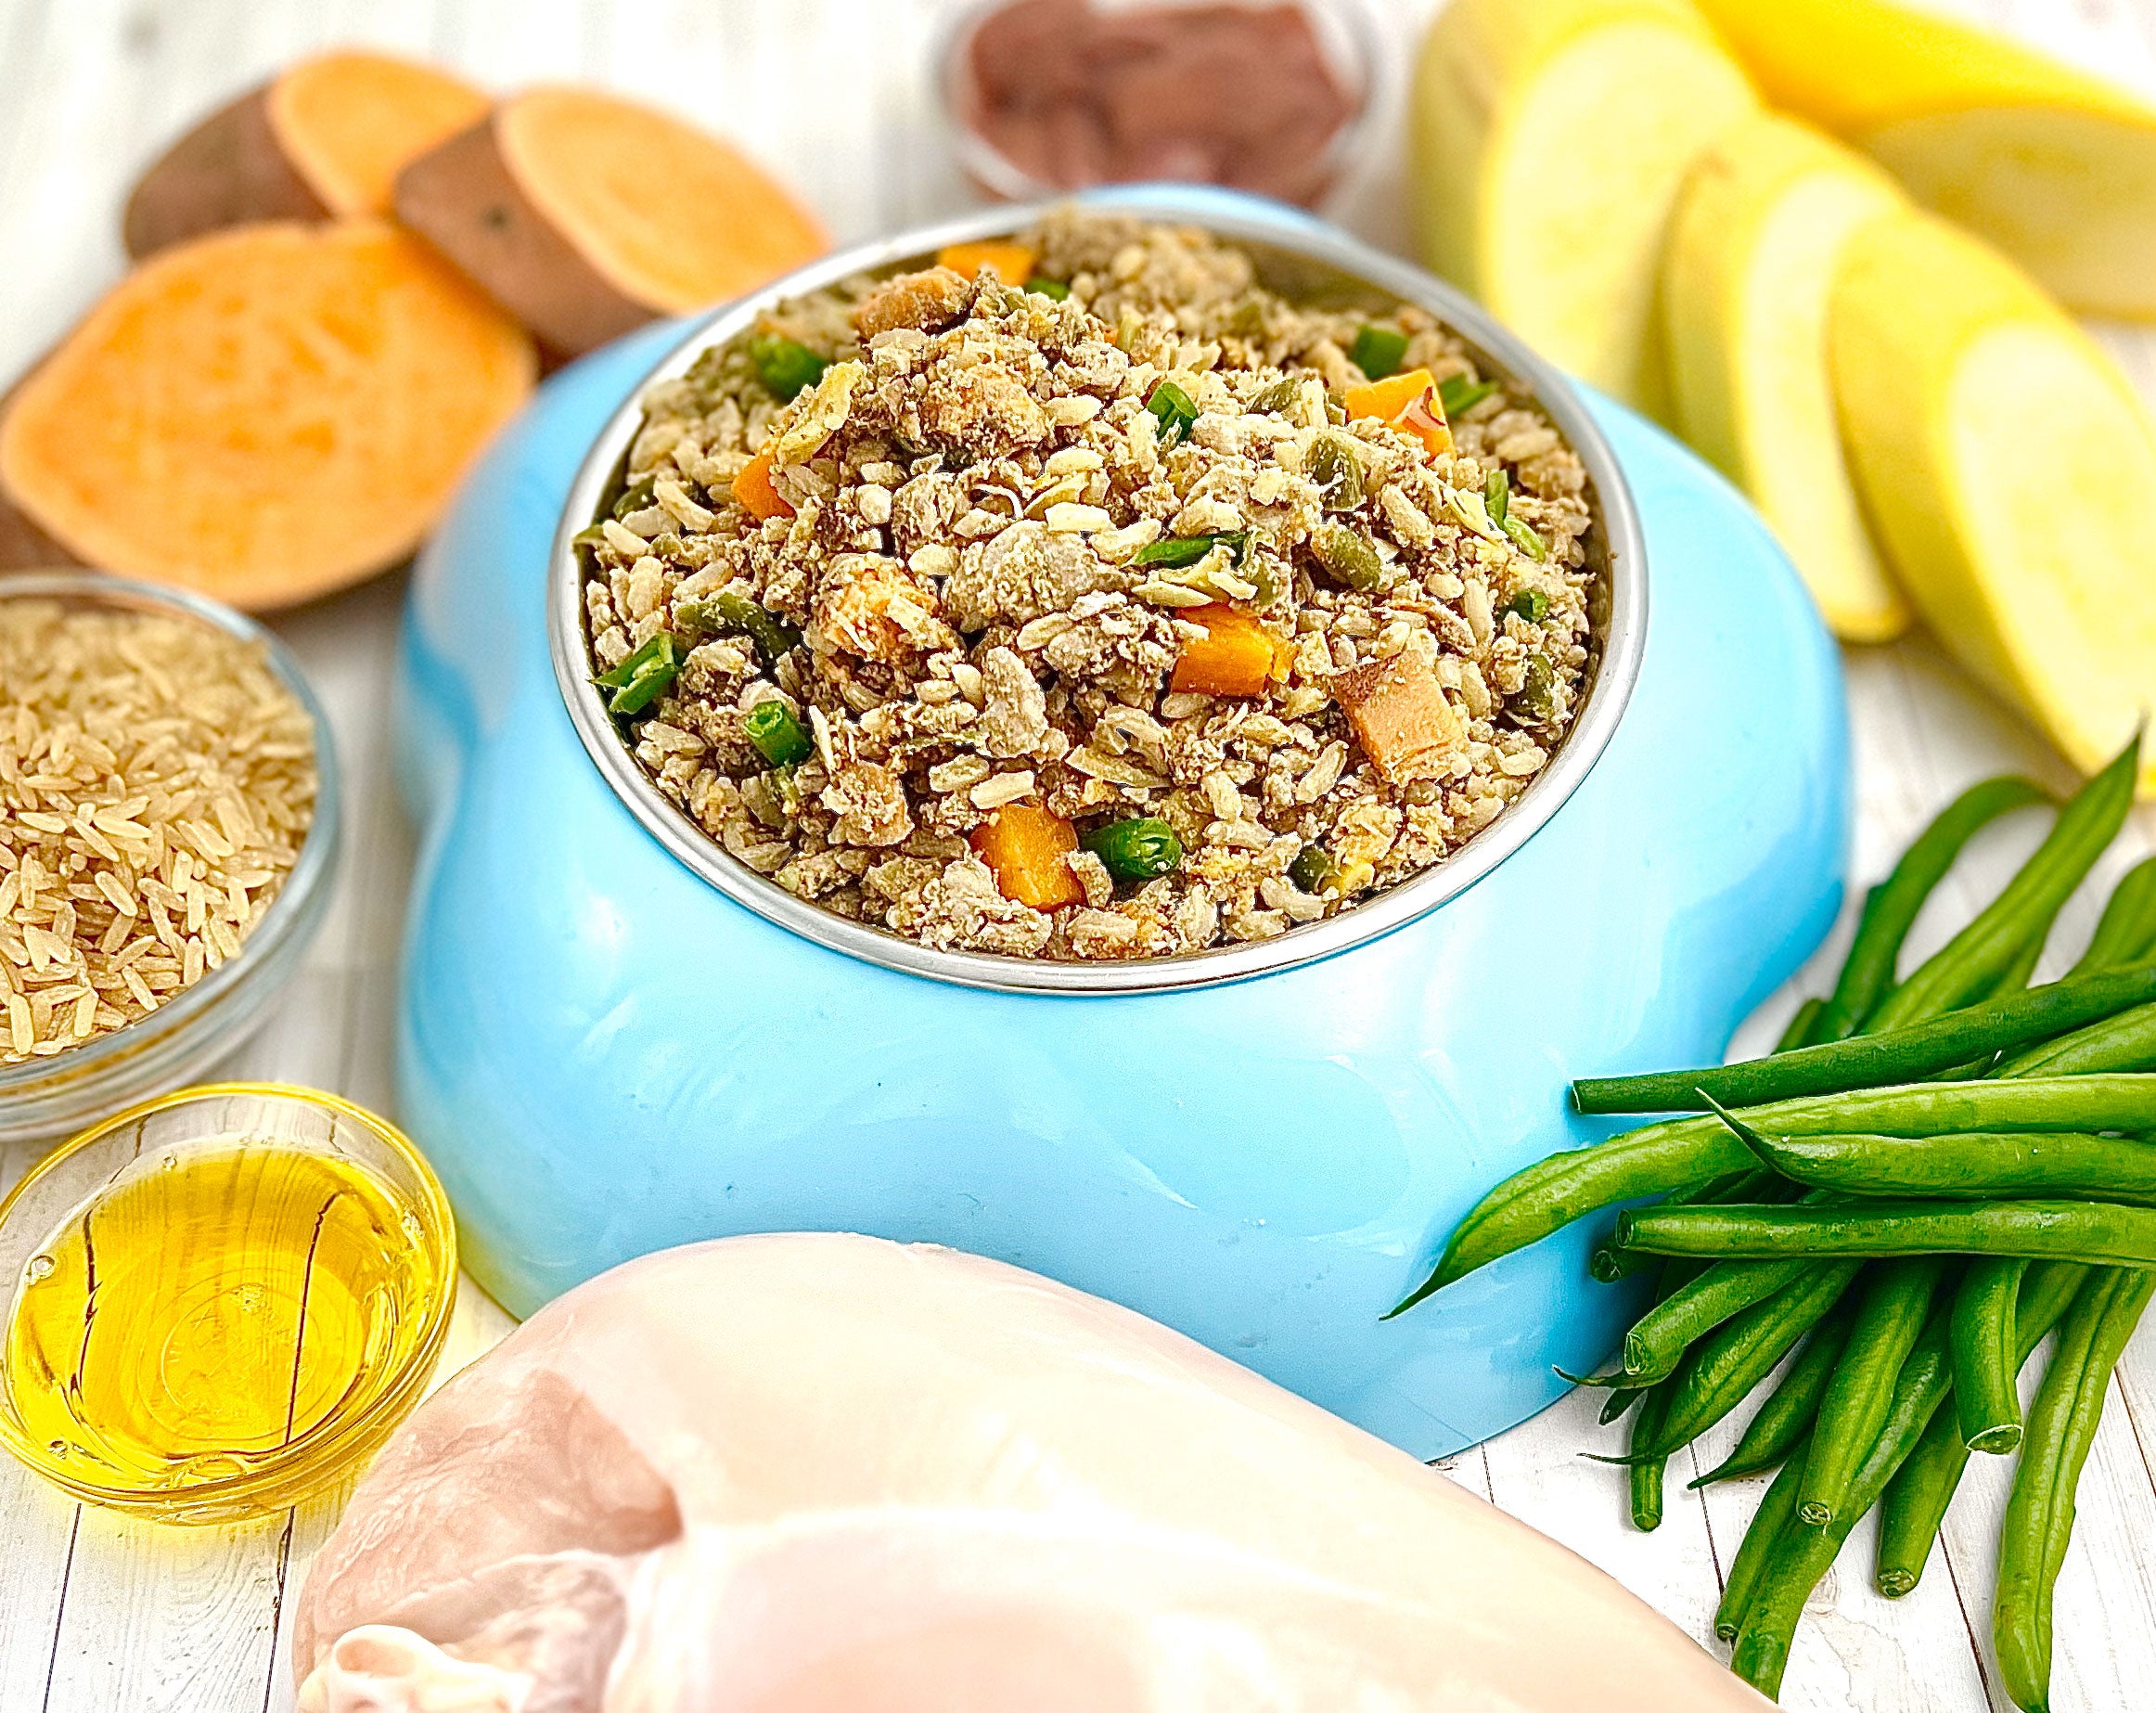 Islamorada Chicken & Brown Rice Cat Meal | Meals for Dogs